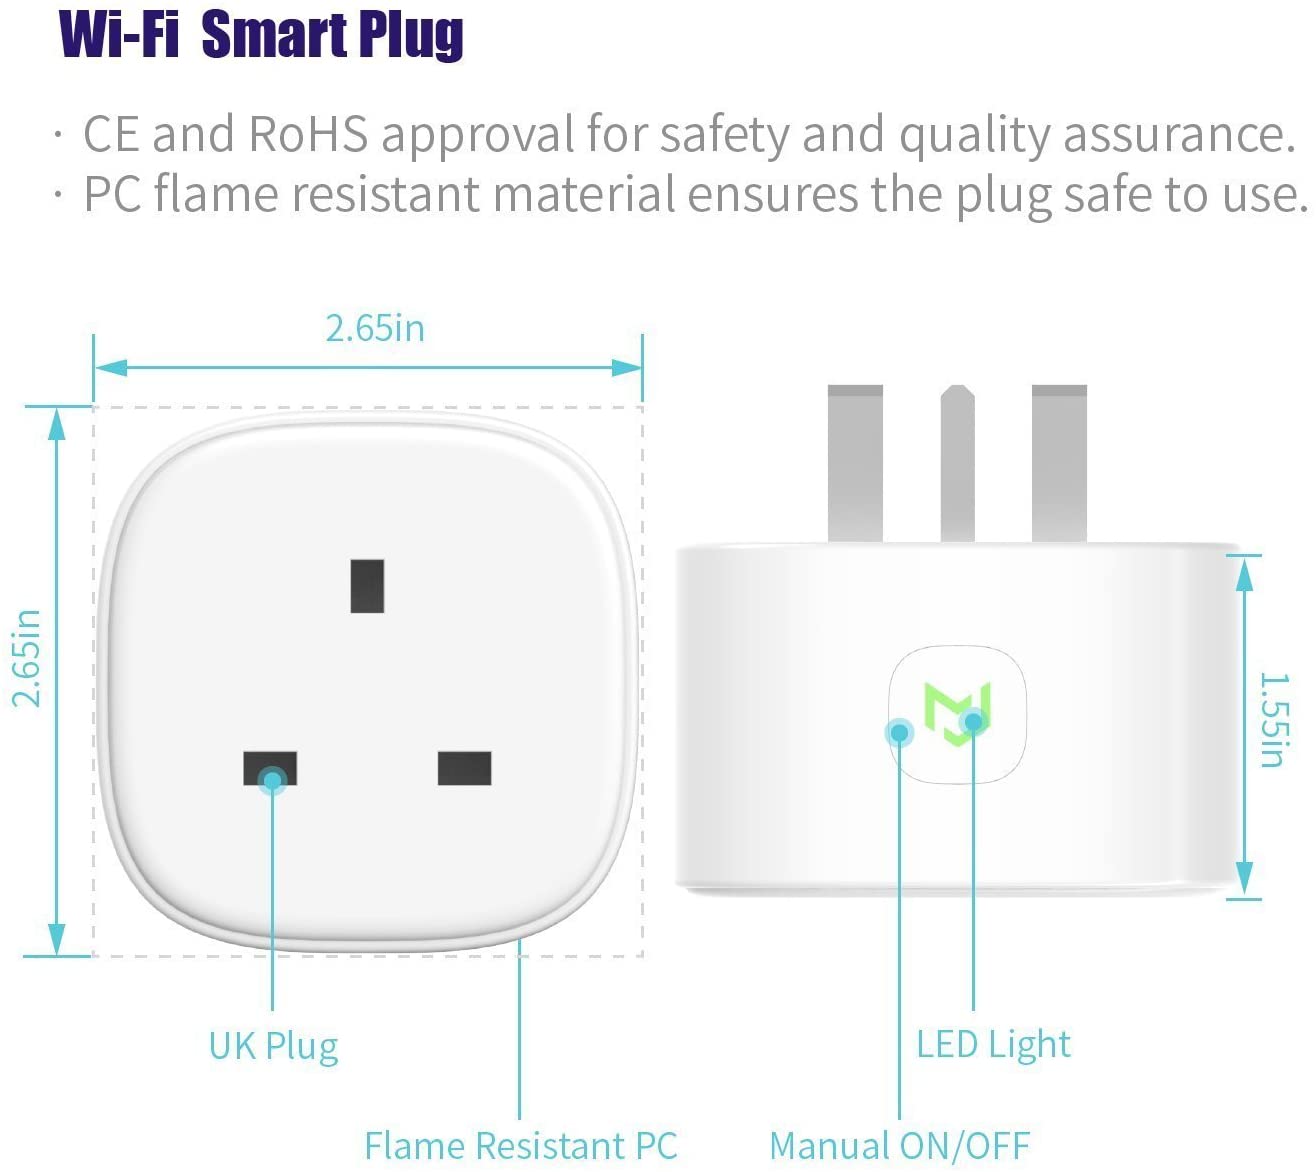 Pack of 2 Meross MSS210 Smart WiFi Plugs IFTTT Supported App Remote Control Socket Plug